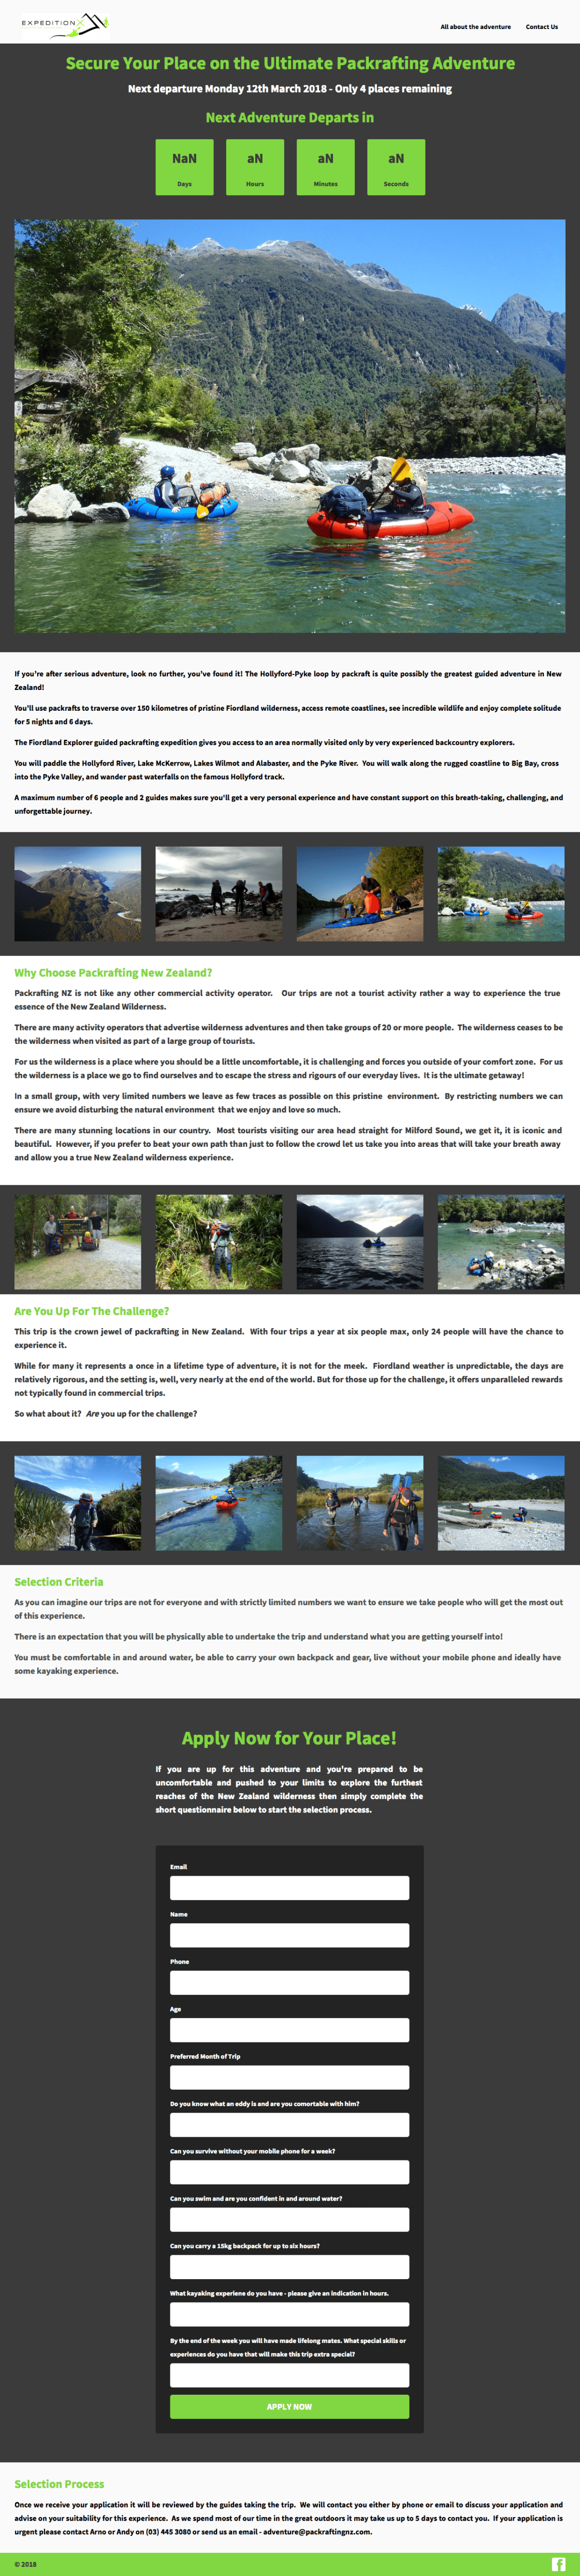 Expedition X/Packrafting NZ example - Made with MailerLite